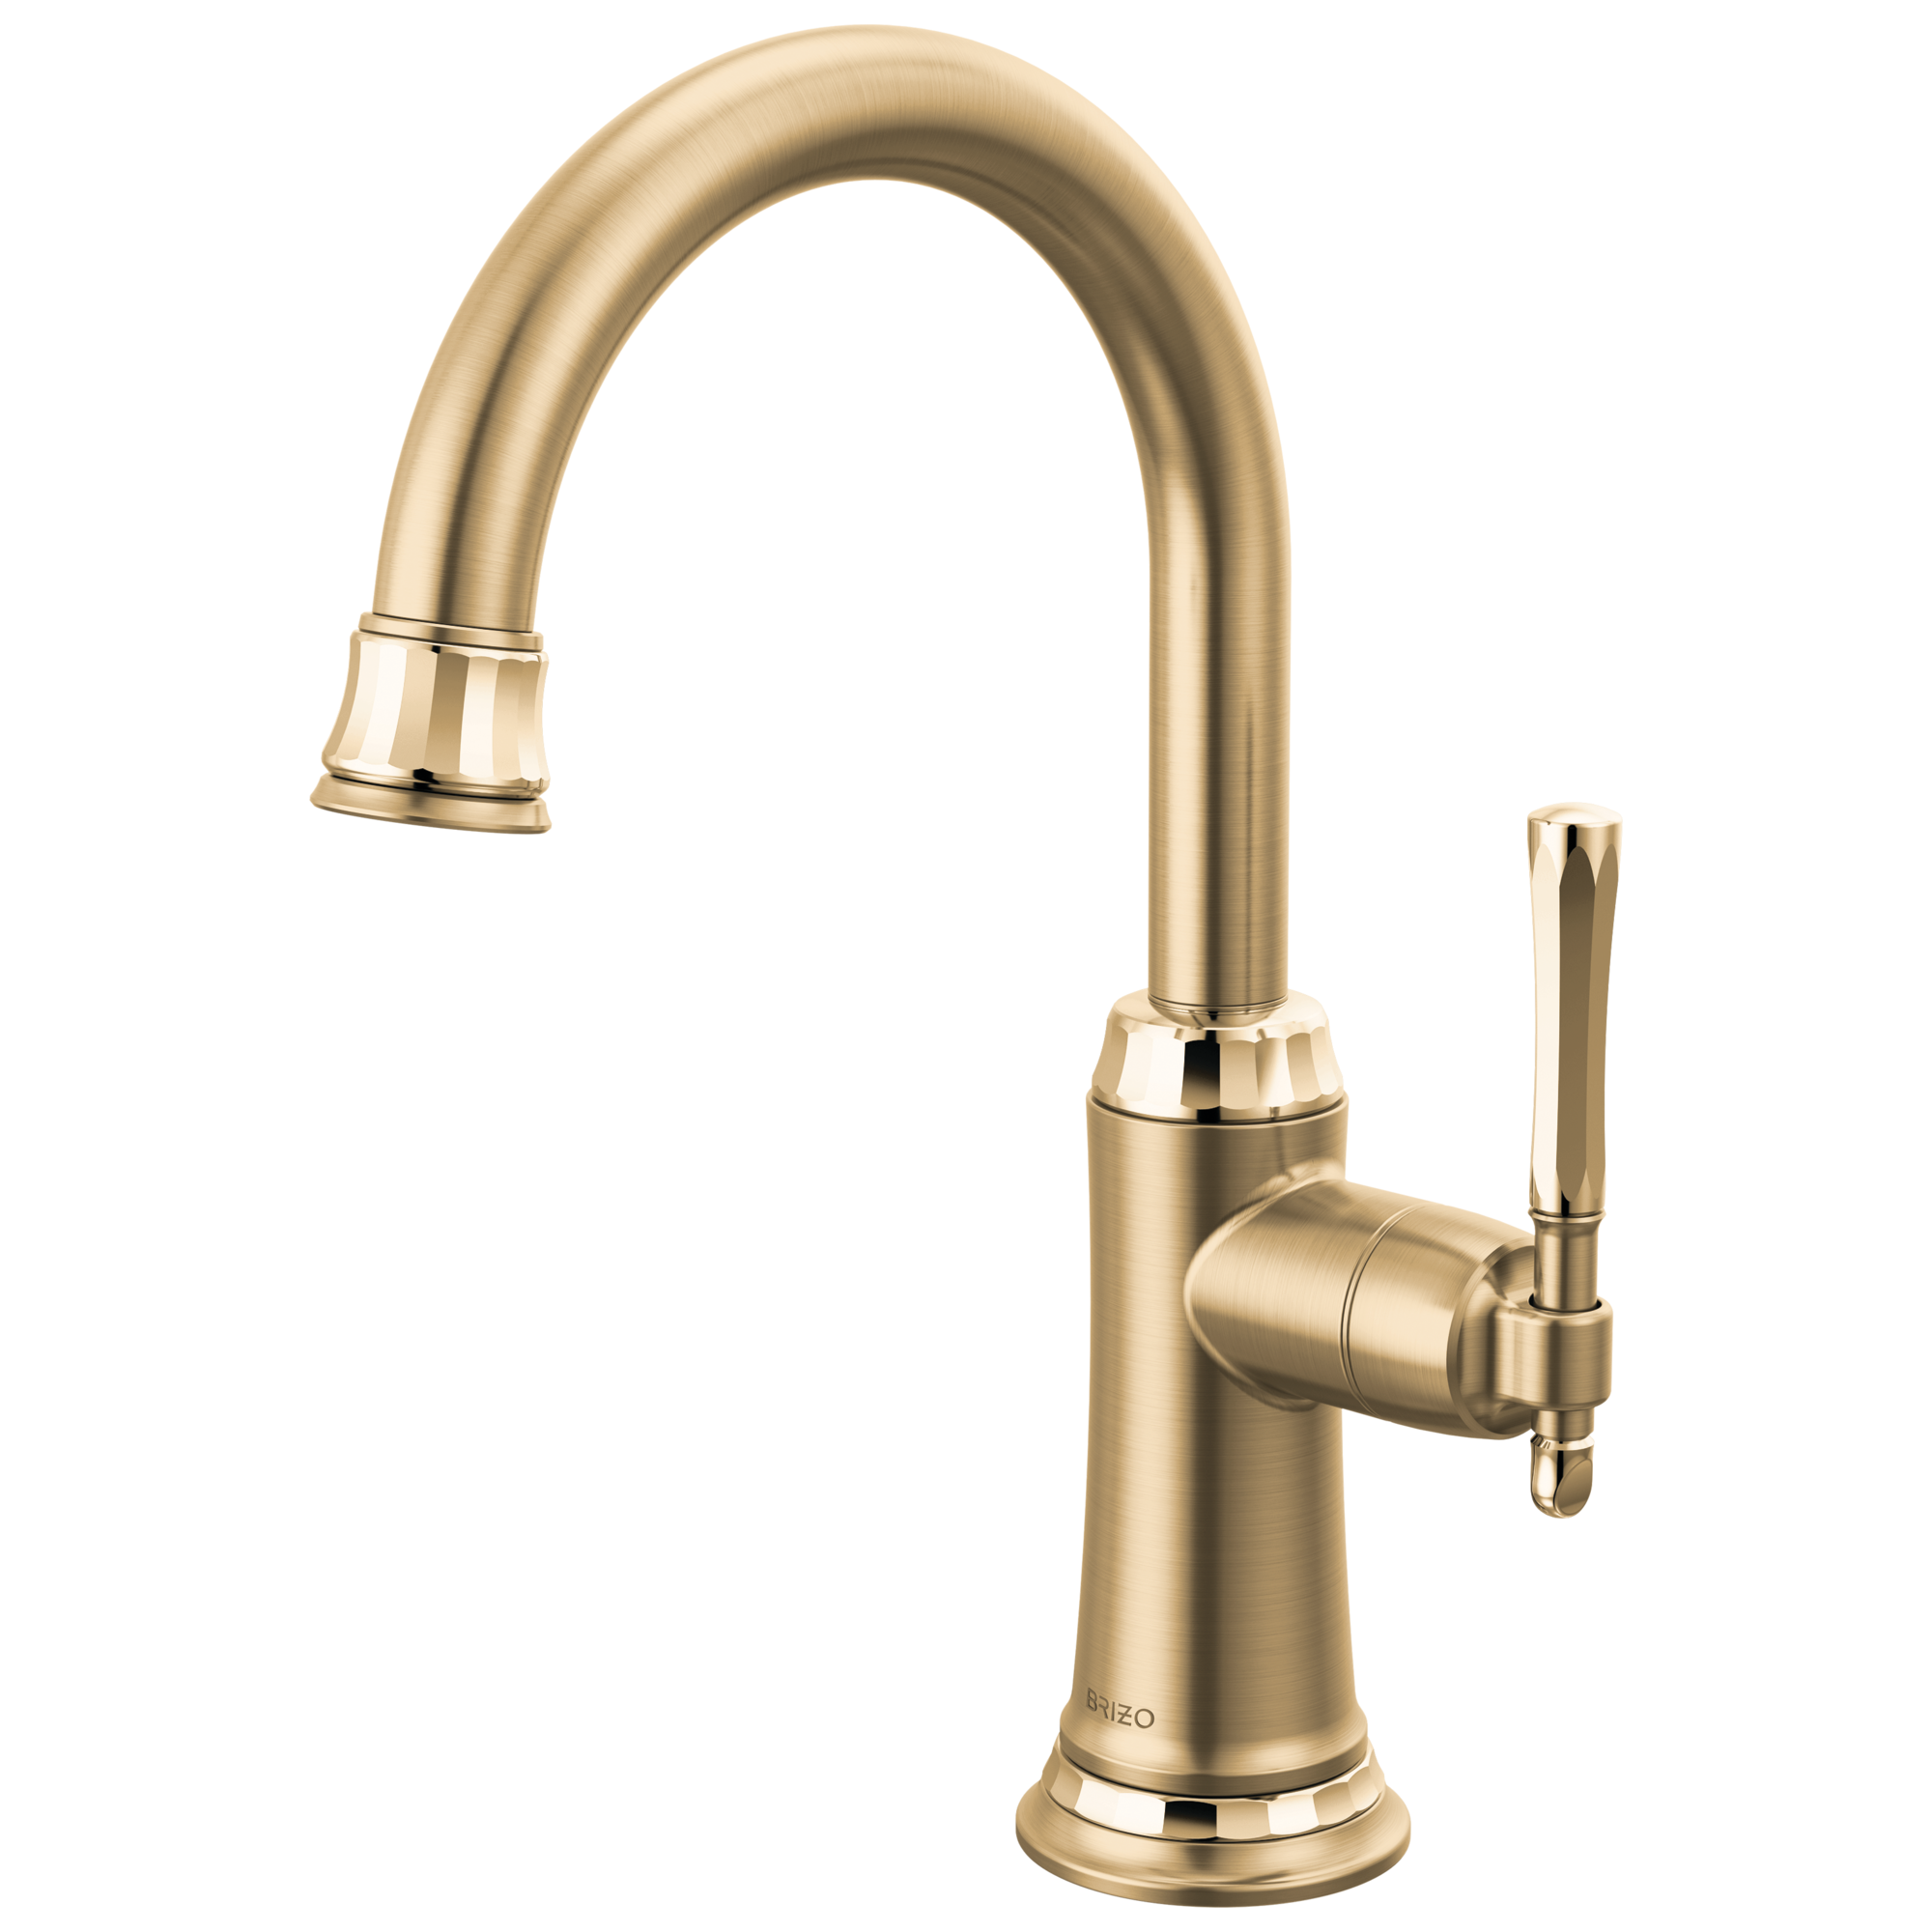 Brizo The Tulham Kitchen Collection by Brizo Beverage Faucet